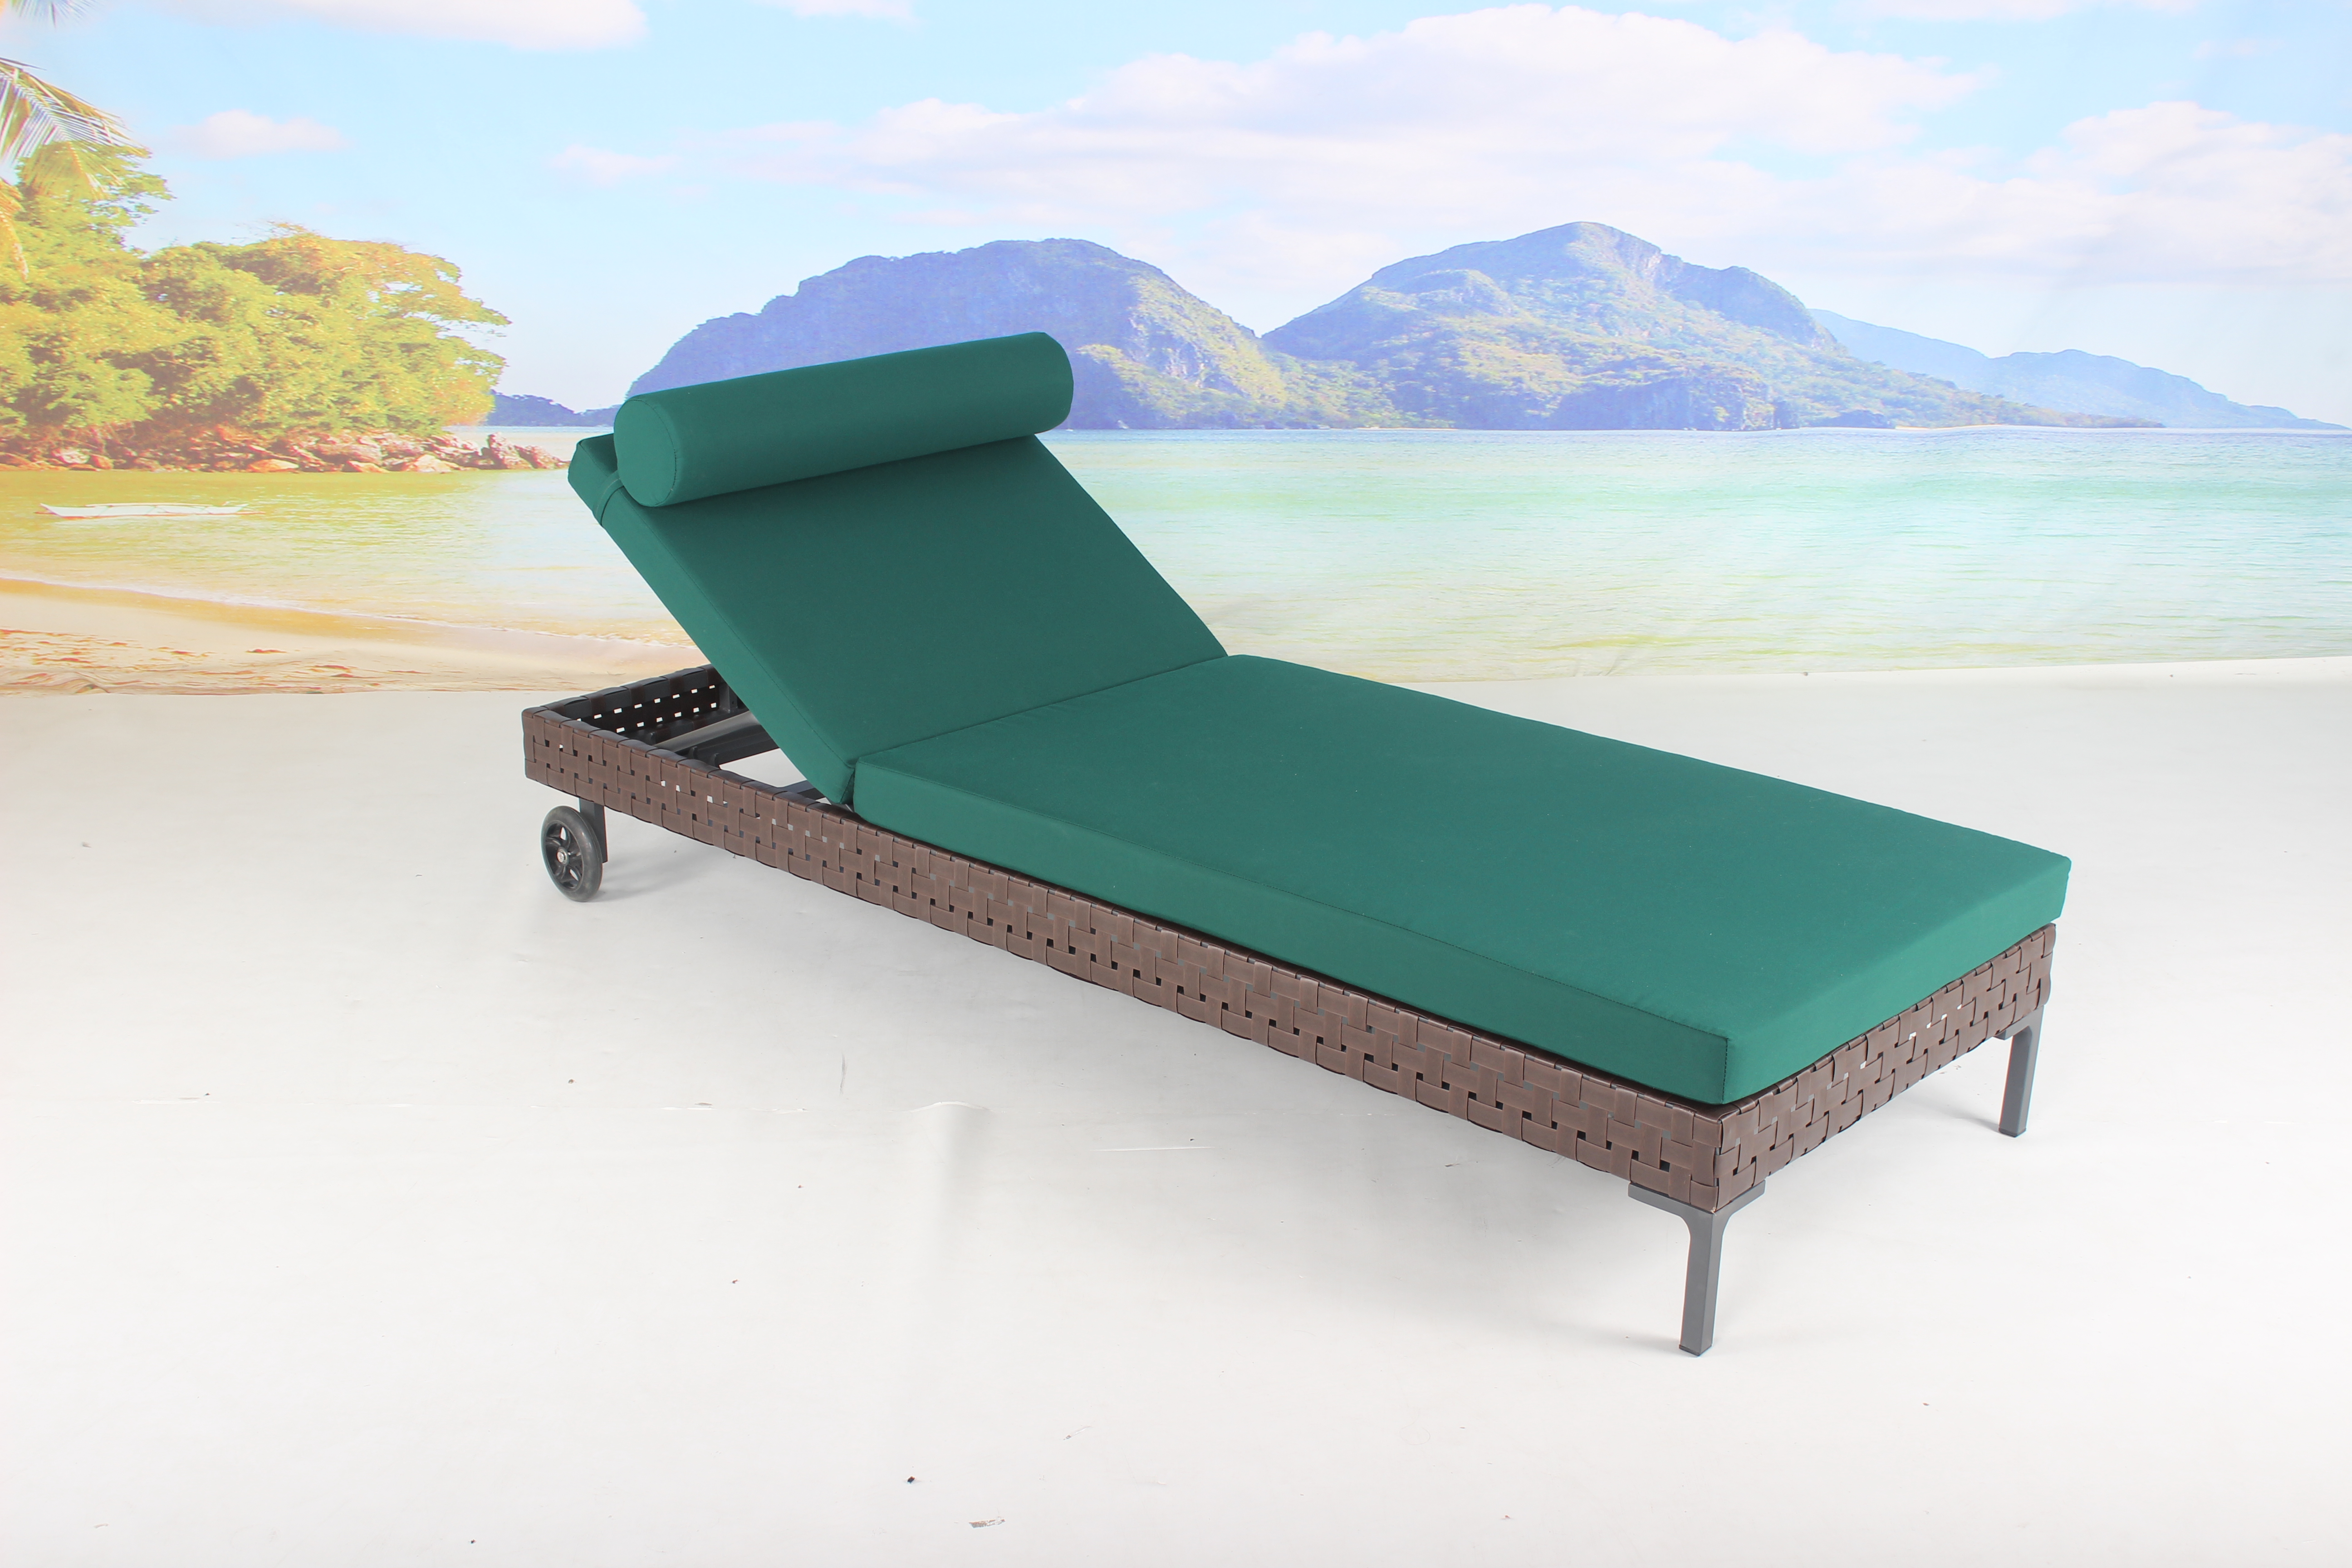 Patio outdoor rattan chaise lounge with cushion